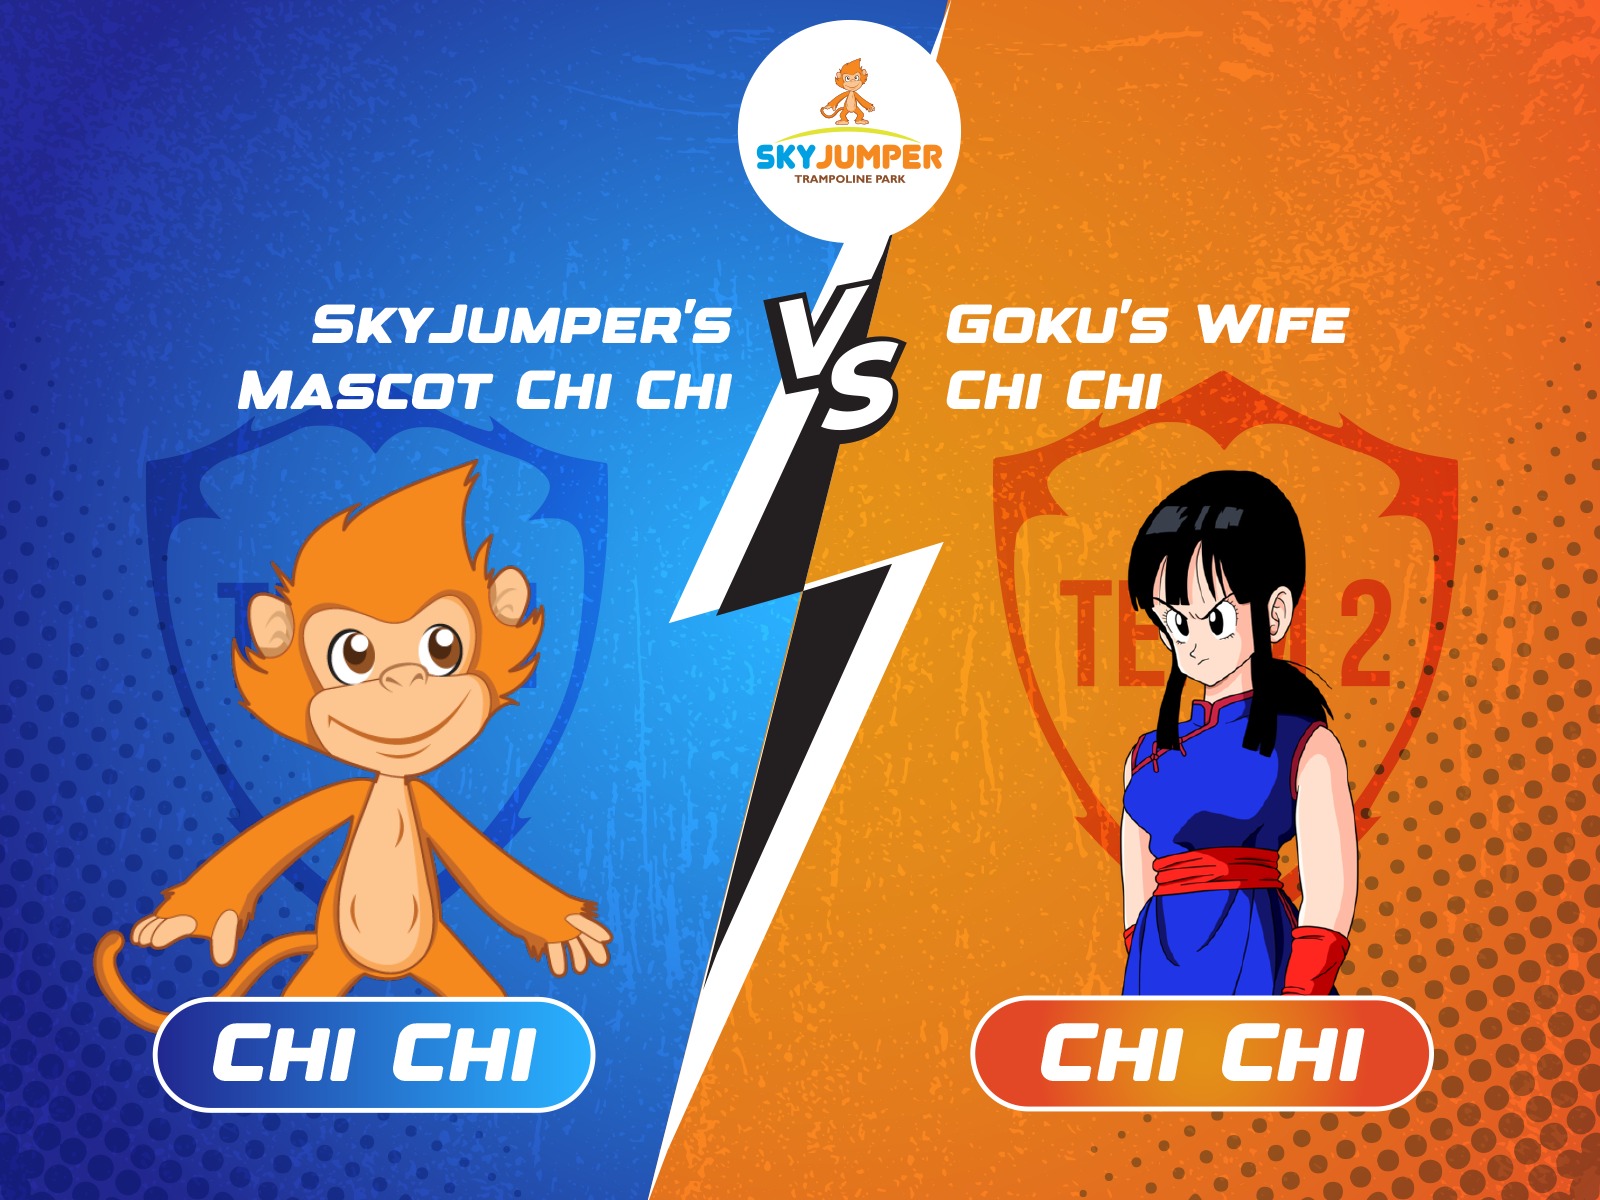 Battle of the Chi Chis: SkyJumper’s Chi Chi vs. Goku’s Wife Chi Chi